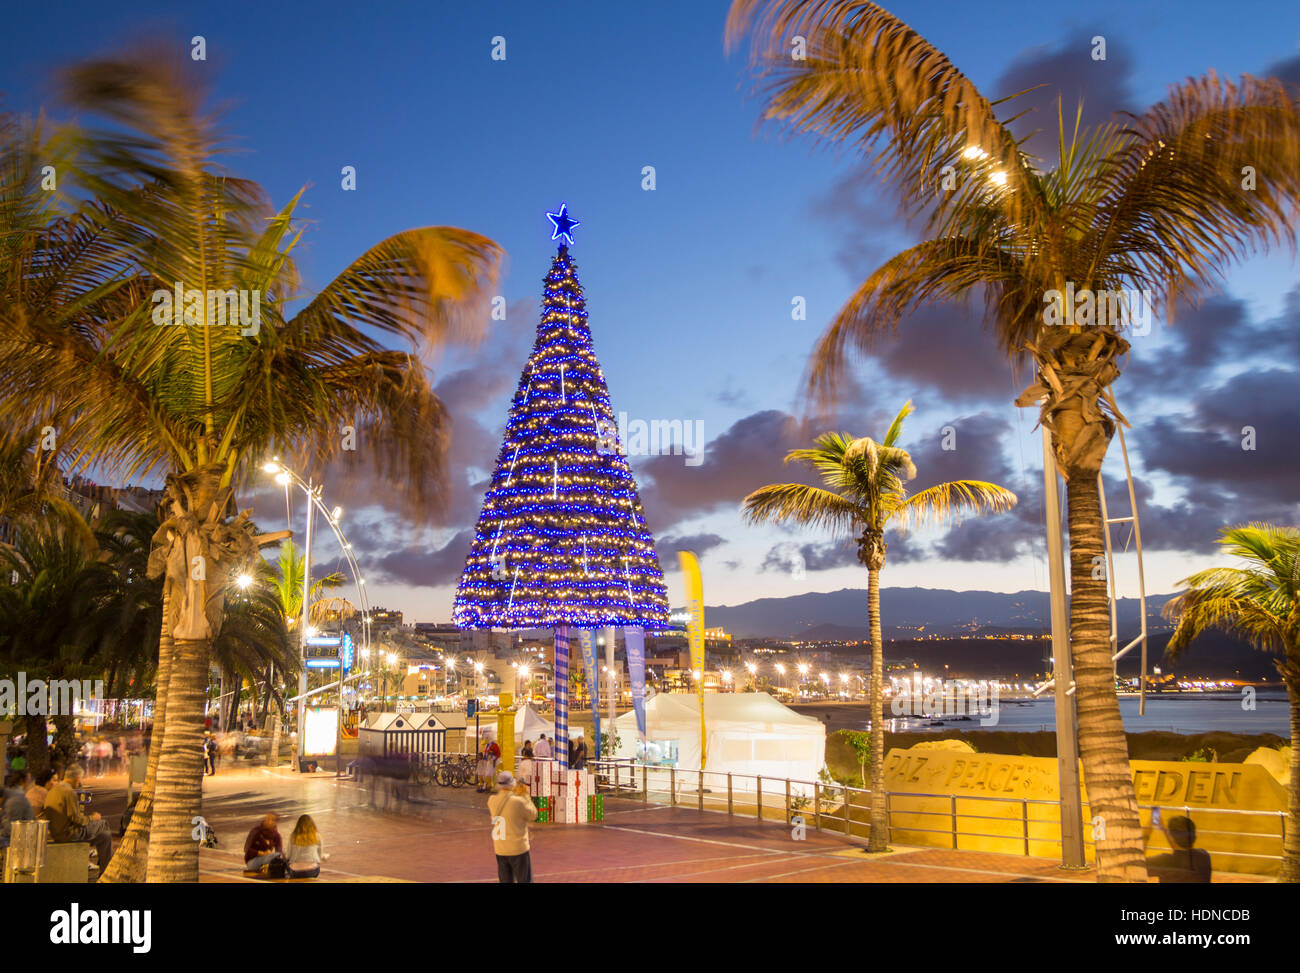 Las Palmas, Gran Canaria, Canary Islands, Spain. 14th December, 2016.  Weather: A balmy 22 degrees Celcius at dusk as the city beach Christmas  tree lights are turned on in Las Palmas, the